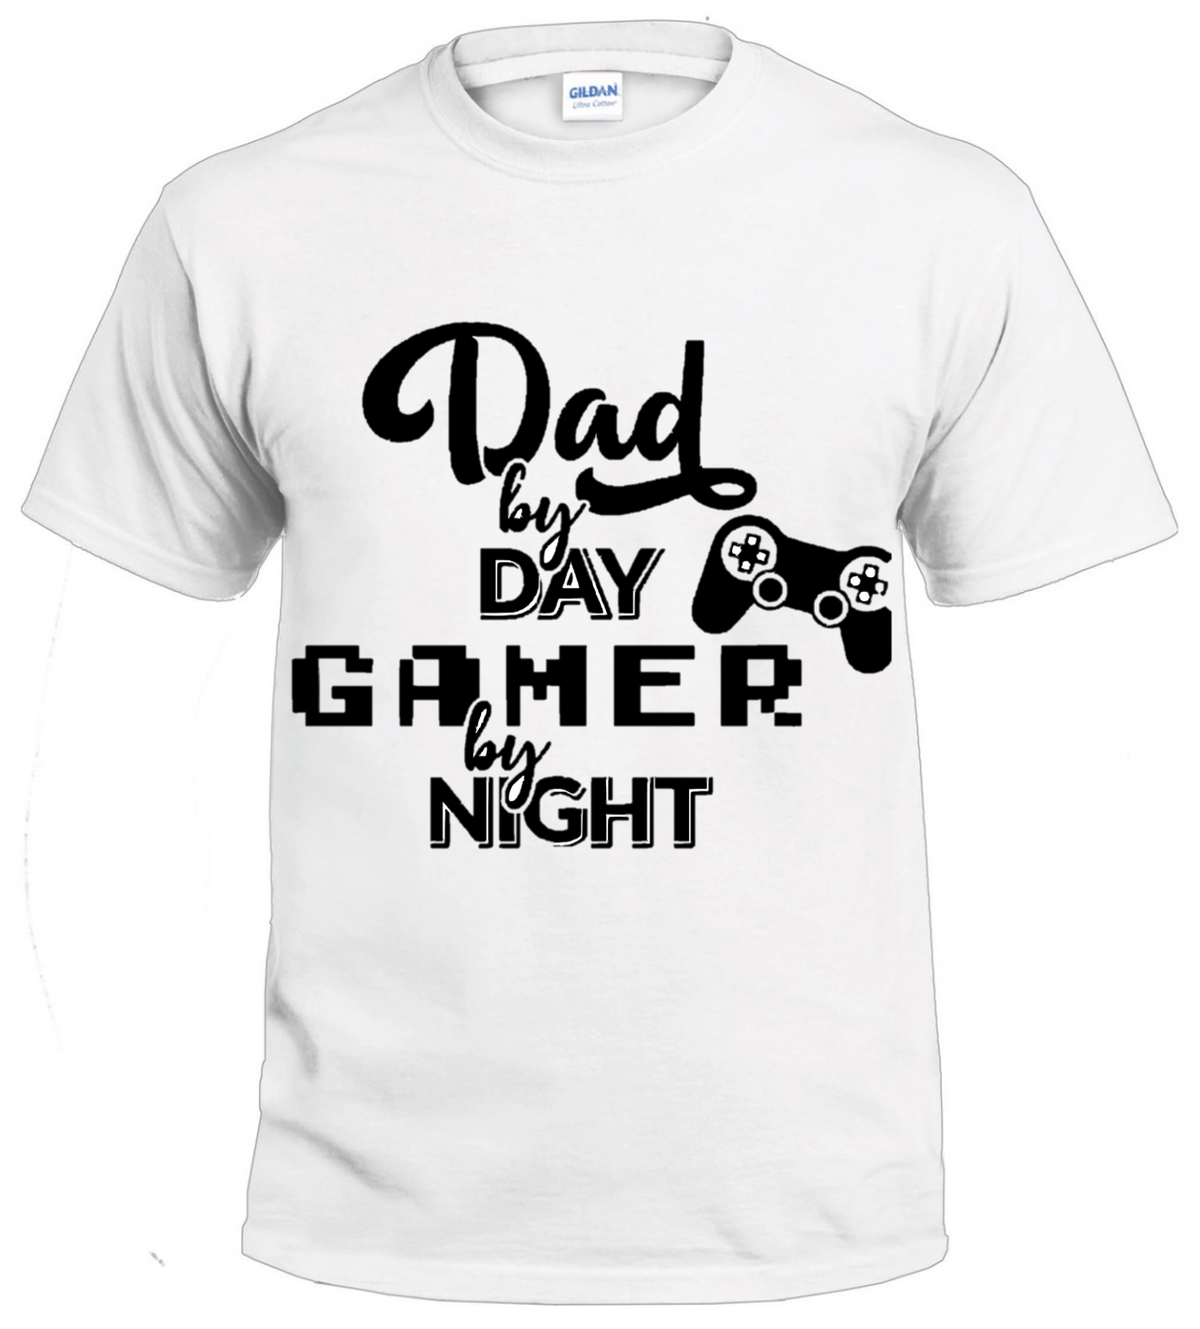 Dad by Day, Gamer by Night t-shirt